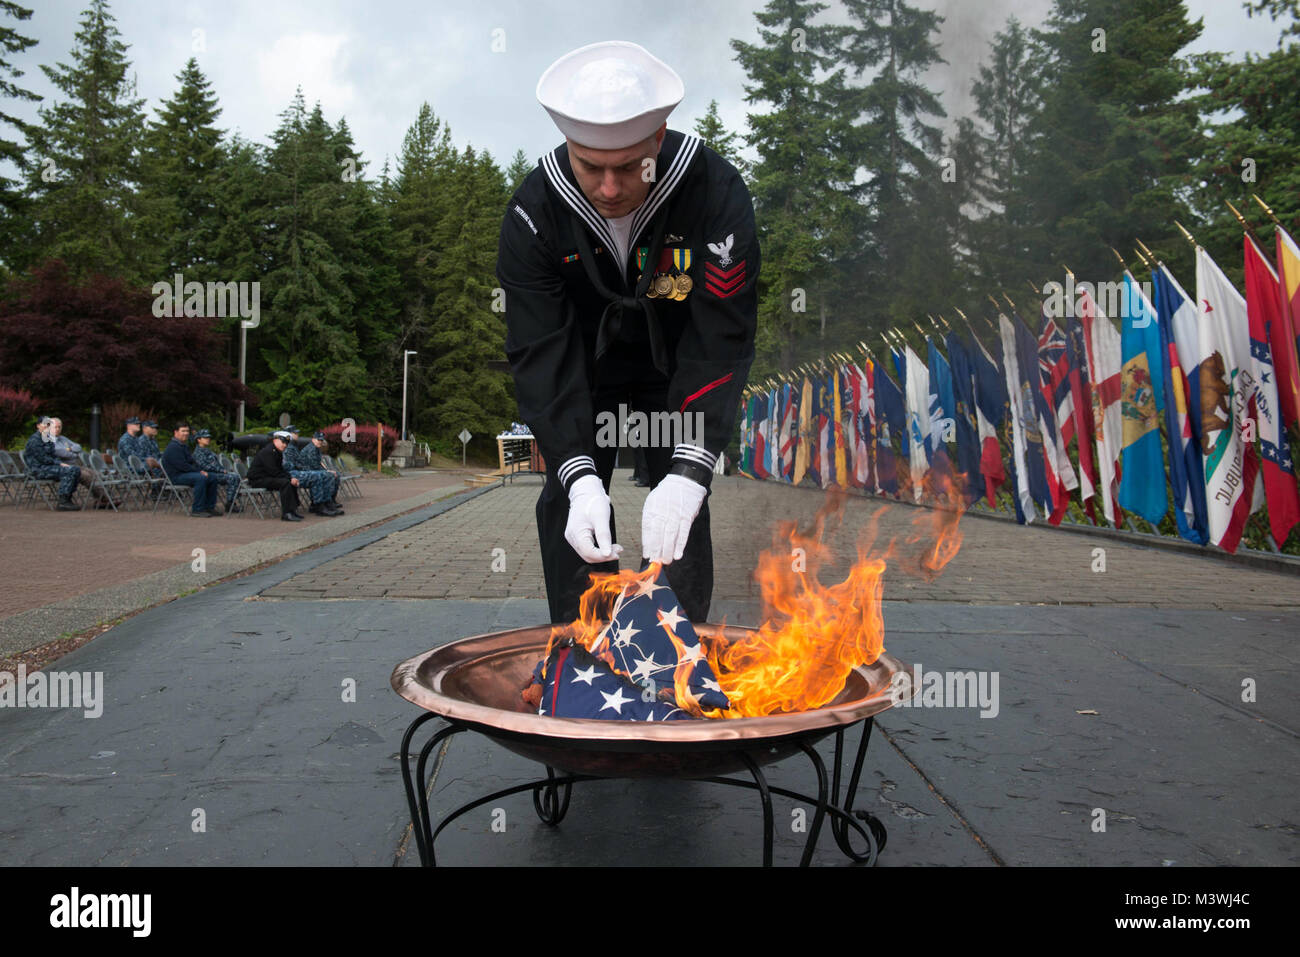 BANGOR, Wash. (June 14, 2017) Electronics Technician (Communications) 1st Class Jonathan Diquattro, from Columbus, Georgia, assigned to Trident Training Facility Bangor, places the remains of a U.S. flag to a fire during a flag retirement ceremony at Naval Base Kitsap - Bangor. When a U.S. flag becomes worn, torn, faded, or badly soiled, the flag should be retired with the dignity and respect befitting it. The traditional method is to cut the flag into pieces, separating the 13 stripes from canton and incinerating them separately in a respectful manner. (U.S. Navy photo by Mass Communication S Stock Photo